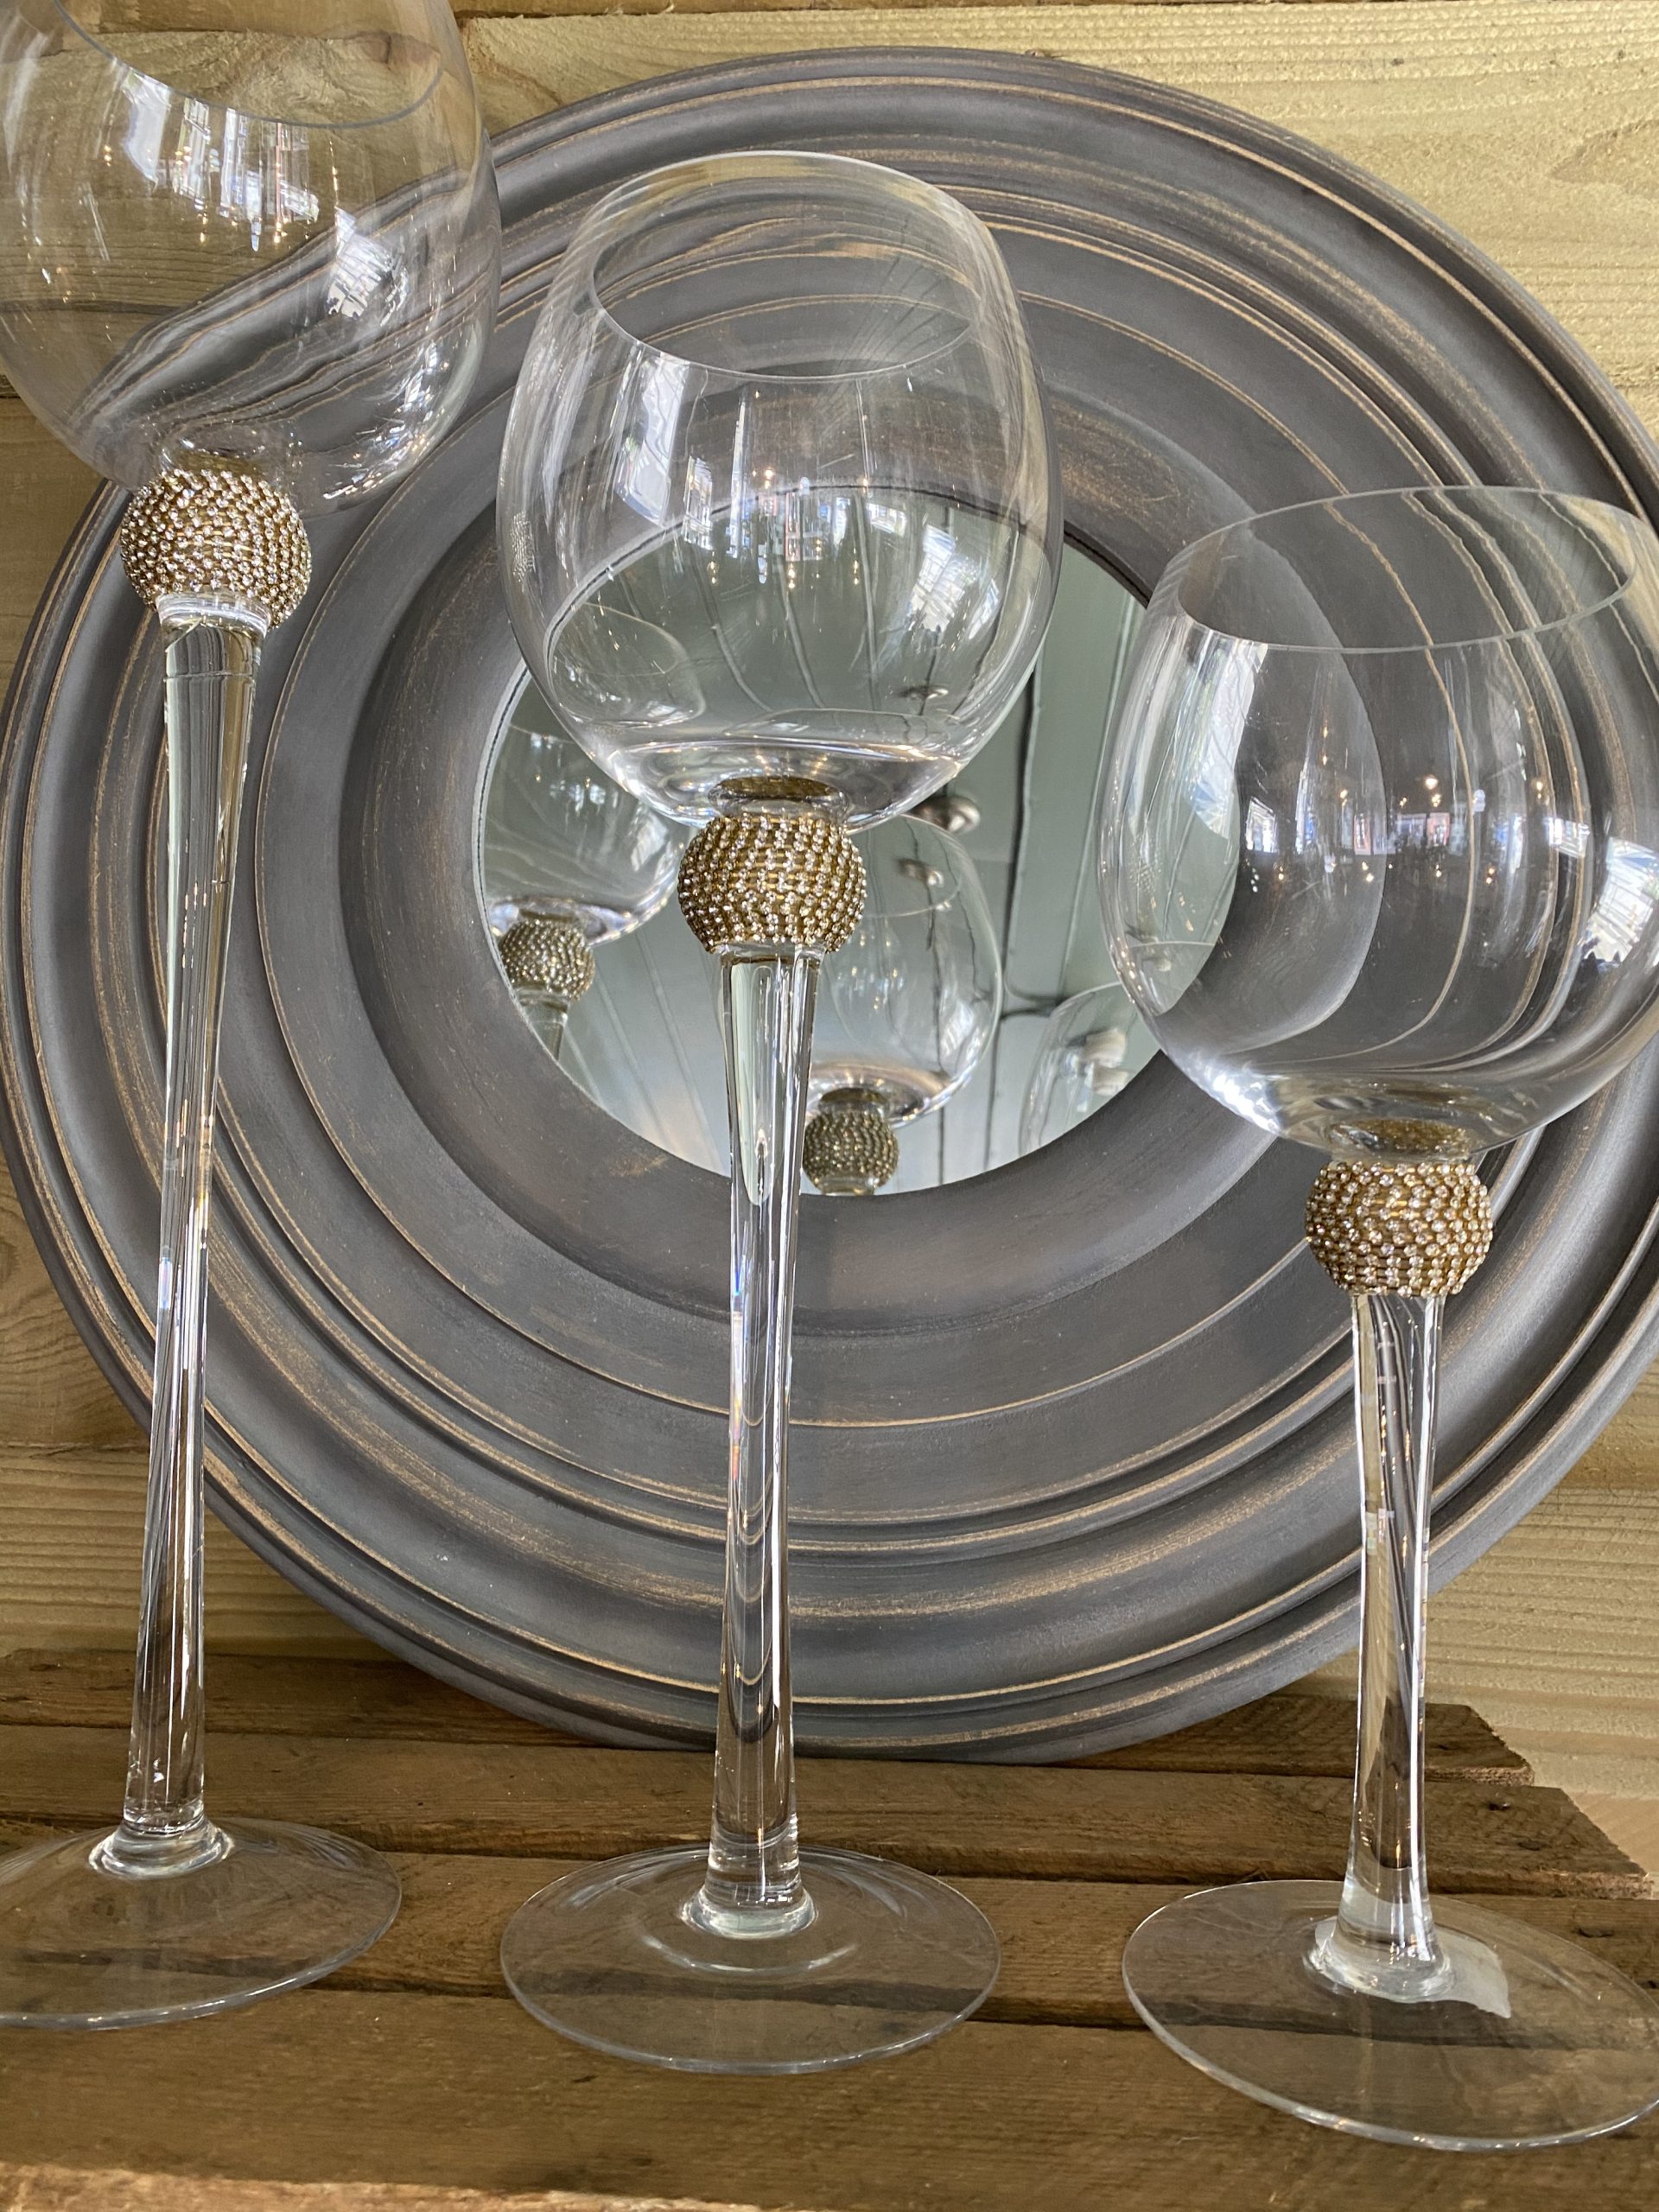 Wine Glass Candle Holders